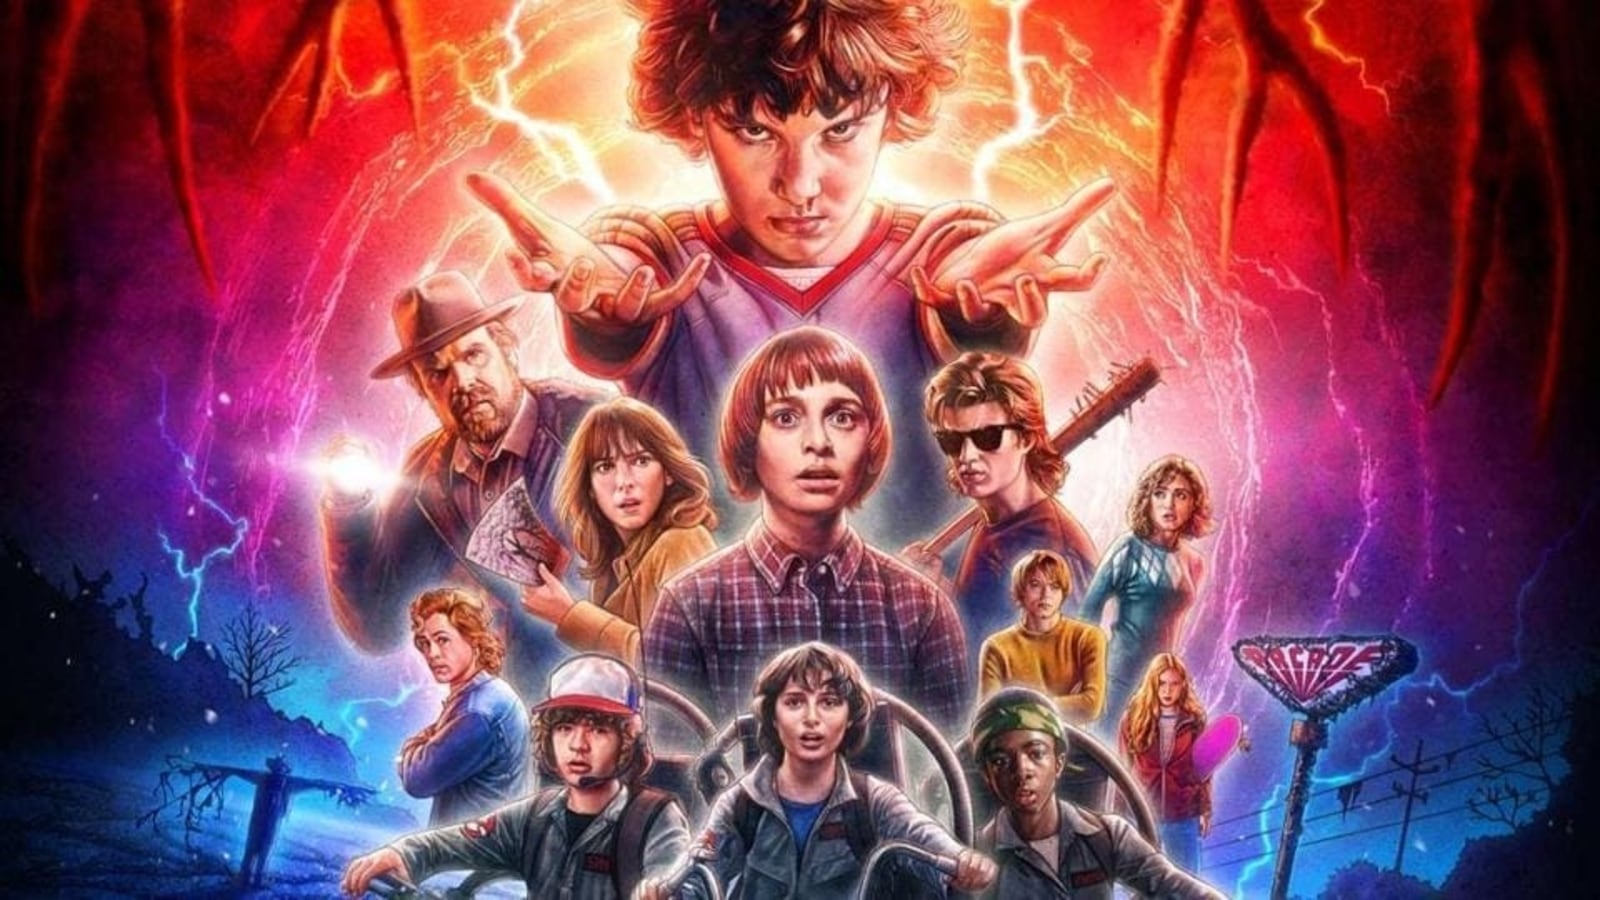 Mike Wheeler's non-story was 'Stranger Things 2' at its weakest